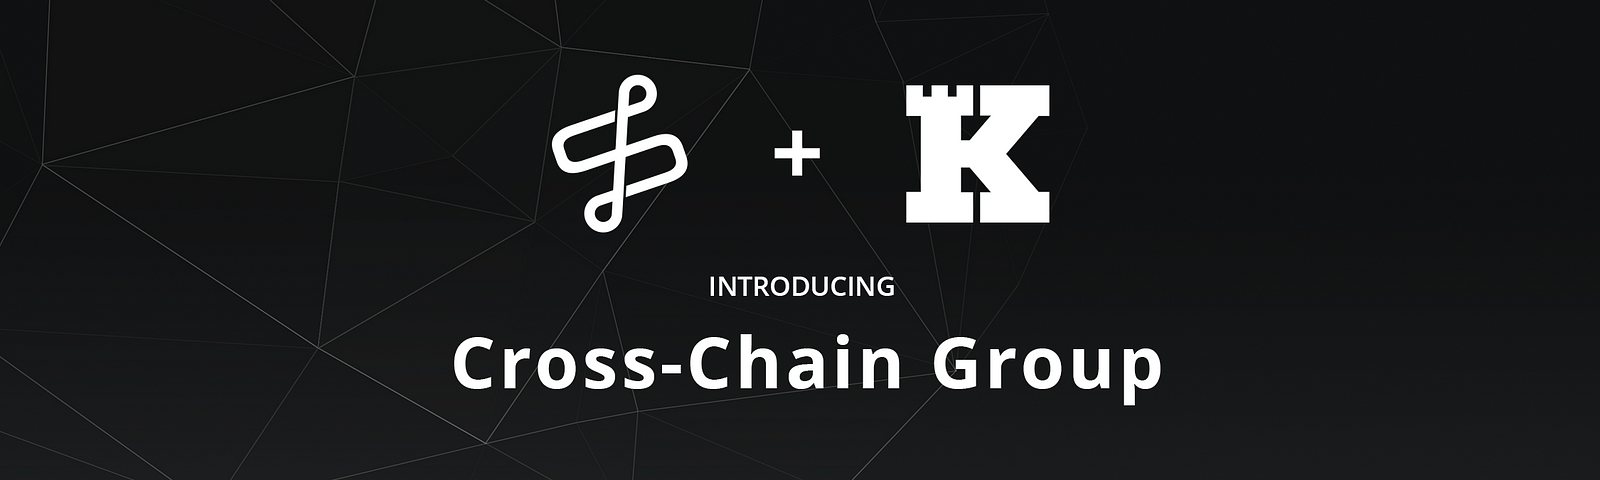 Cross-Chain Group is a  private working group, dedicated to furthering blockchain technologies that benefit multiple chains.